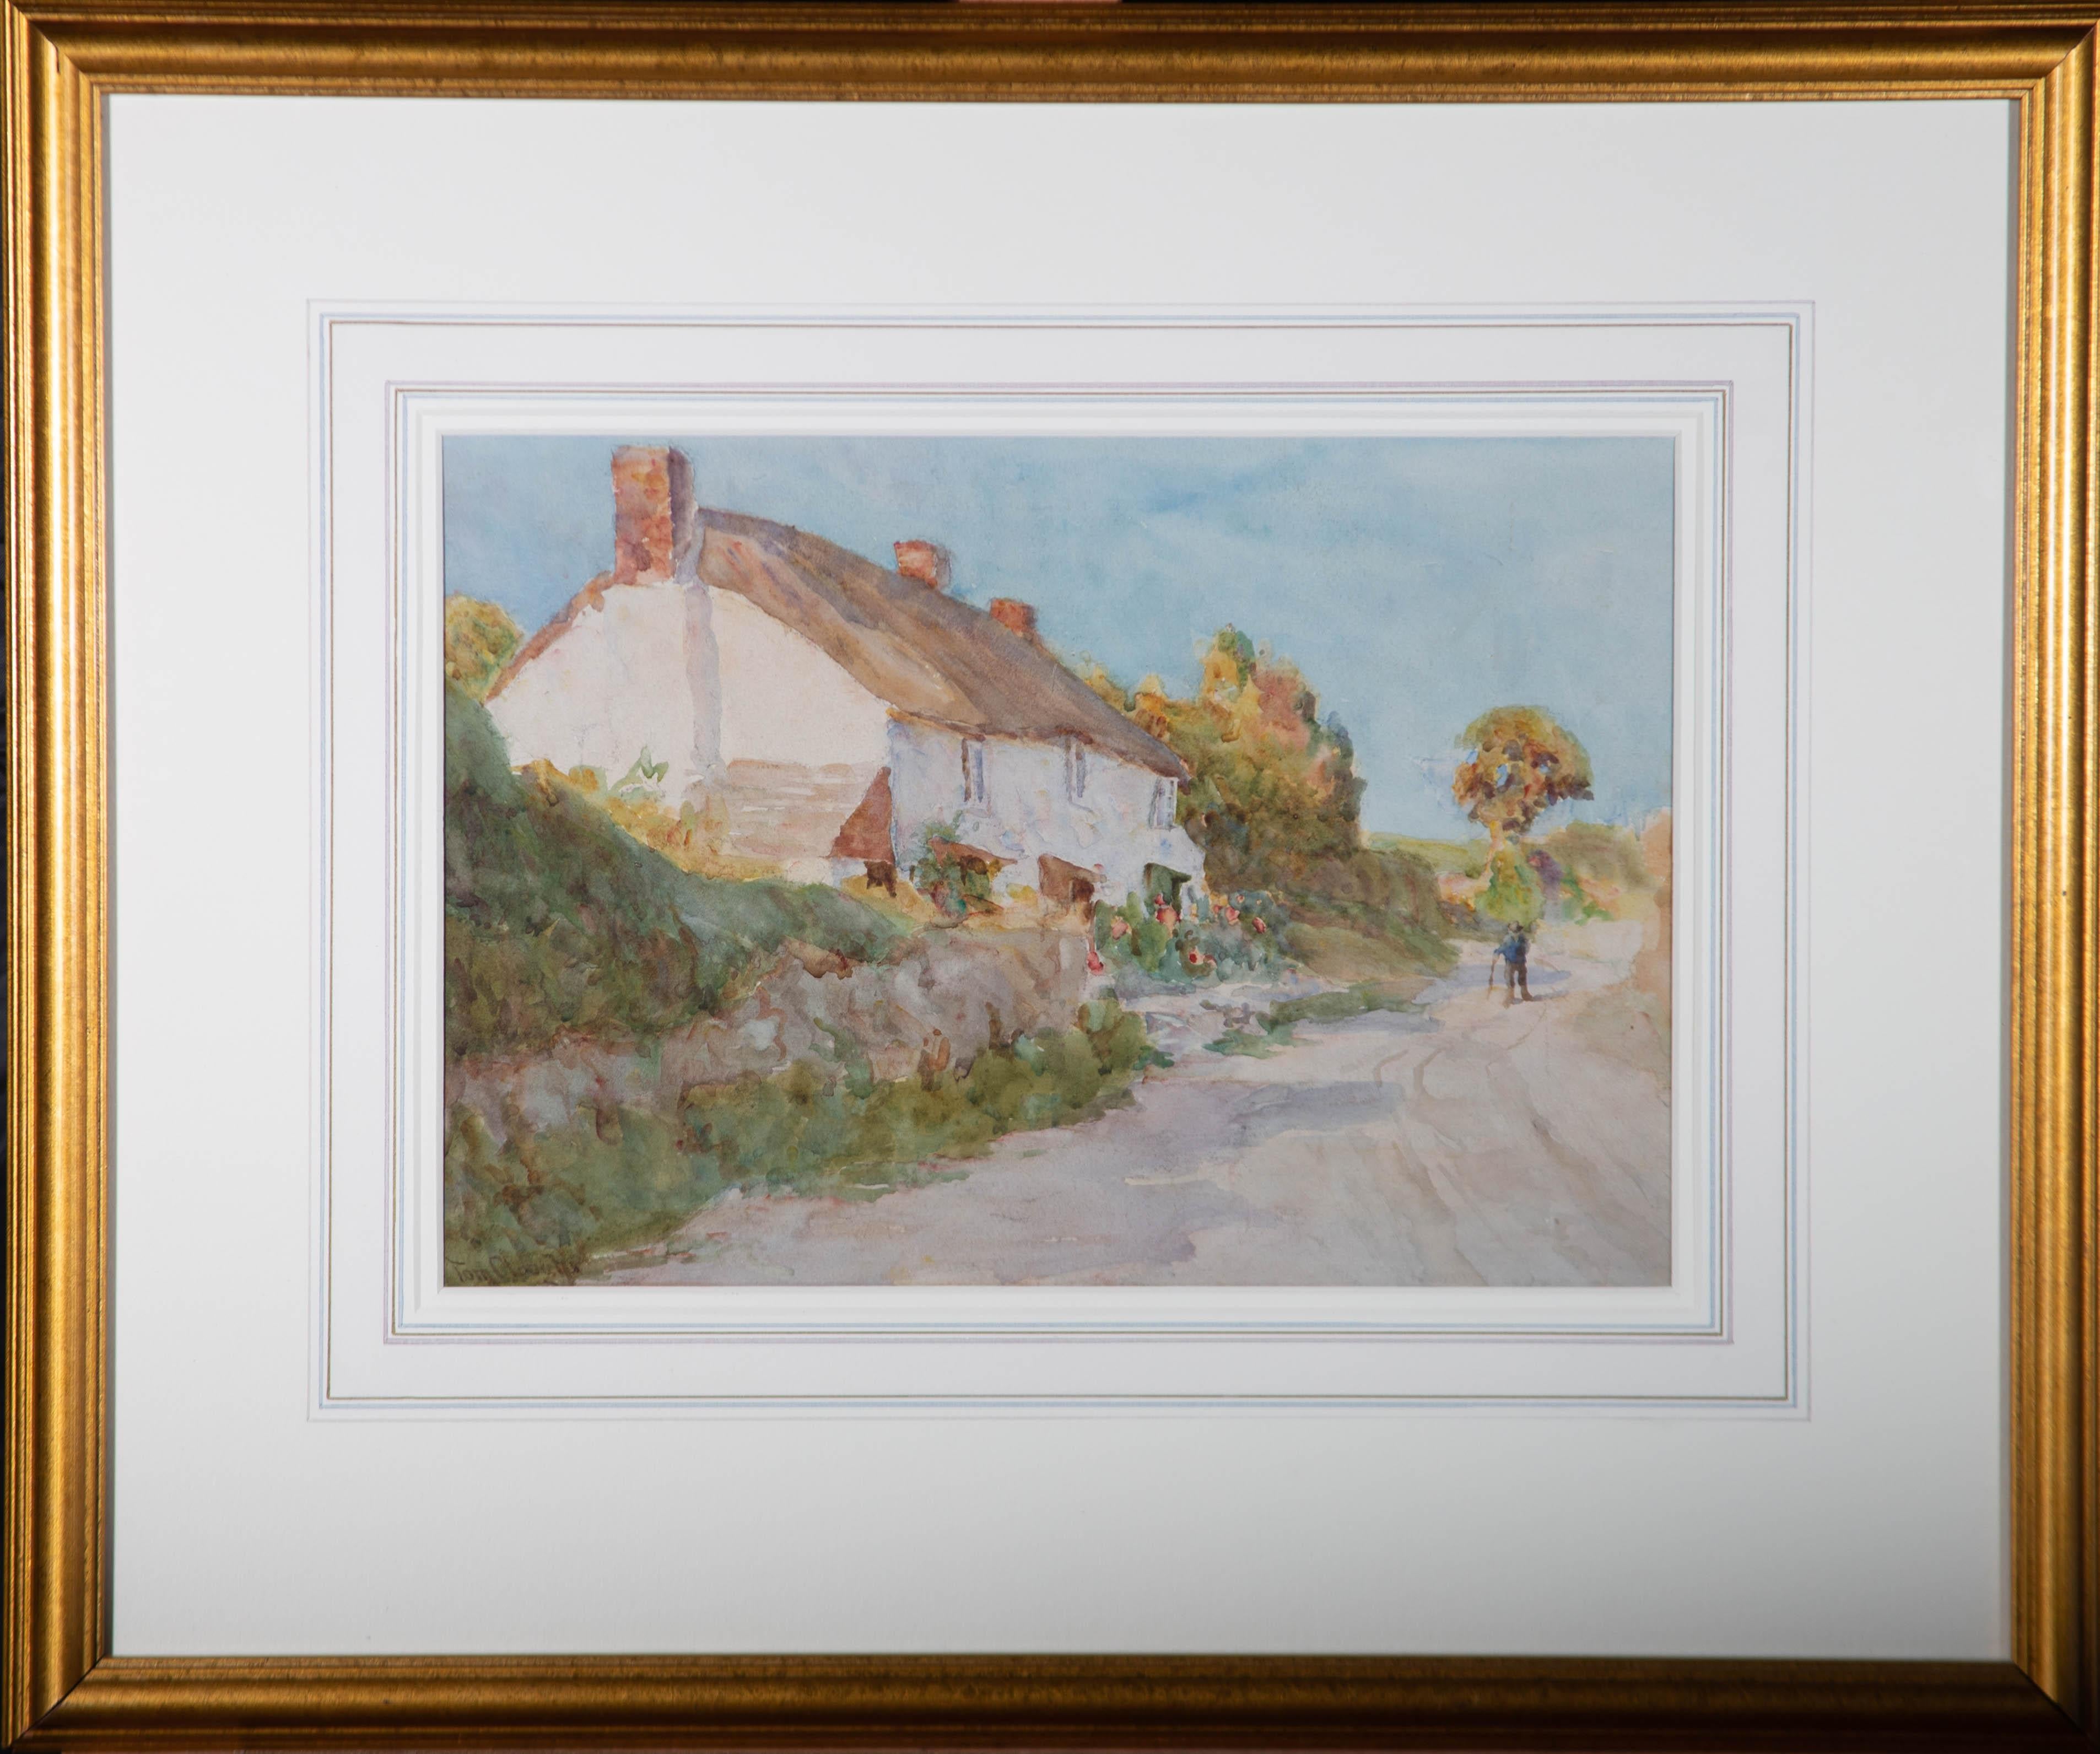 A charming summer scene of a thatched cottage on a country lane. A figure with a walking stick can be seen walking down the lane to the right of the composition. Presented in white washline mount and a distressed gilt-effect wooden frame. On